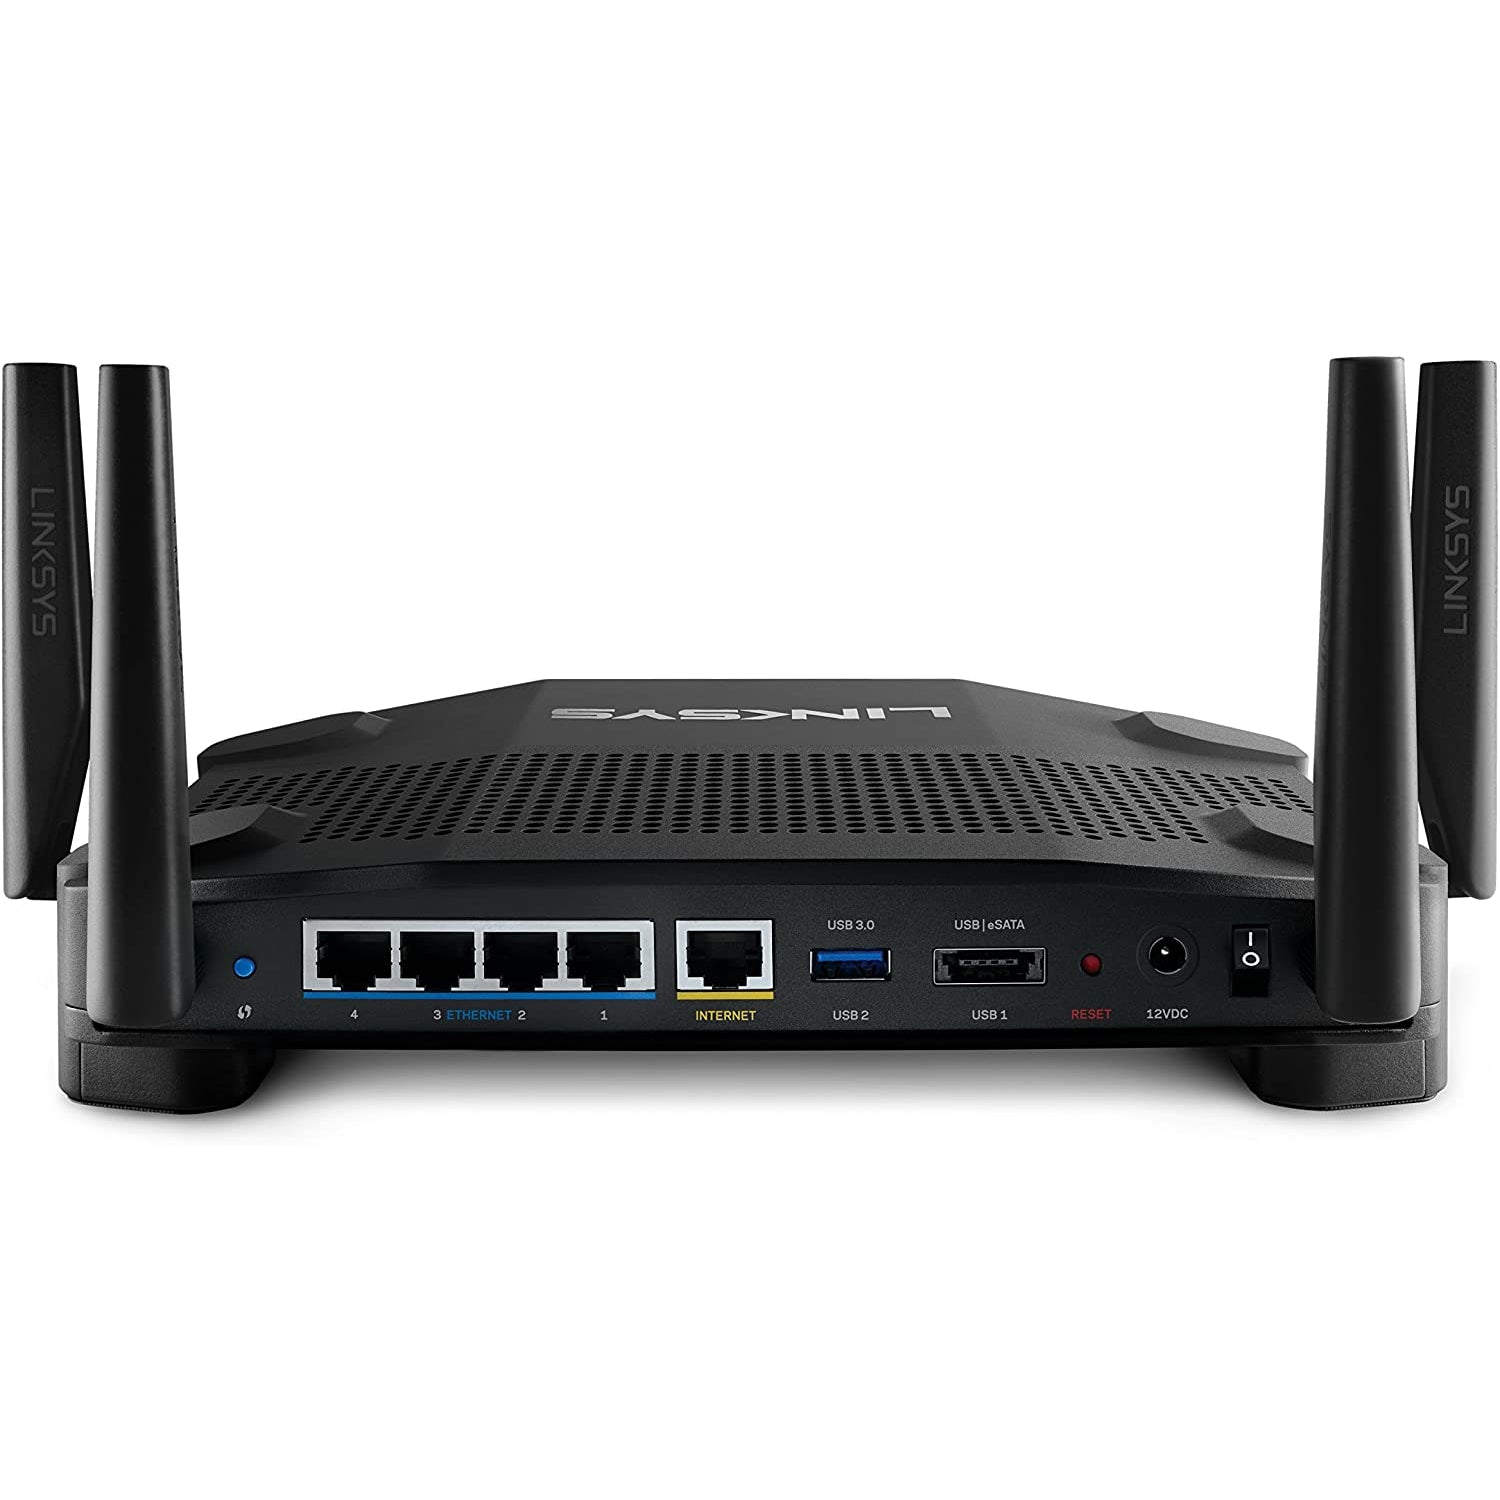 Linksys WRT32X-UK AC3200 Dual-Band Wi-Fi Gaming Router with Killer Prioritisation Engine